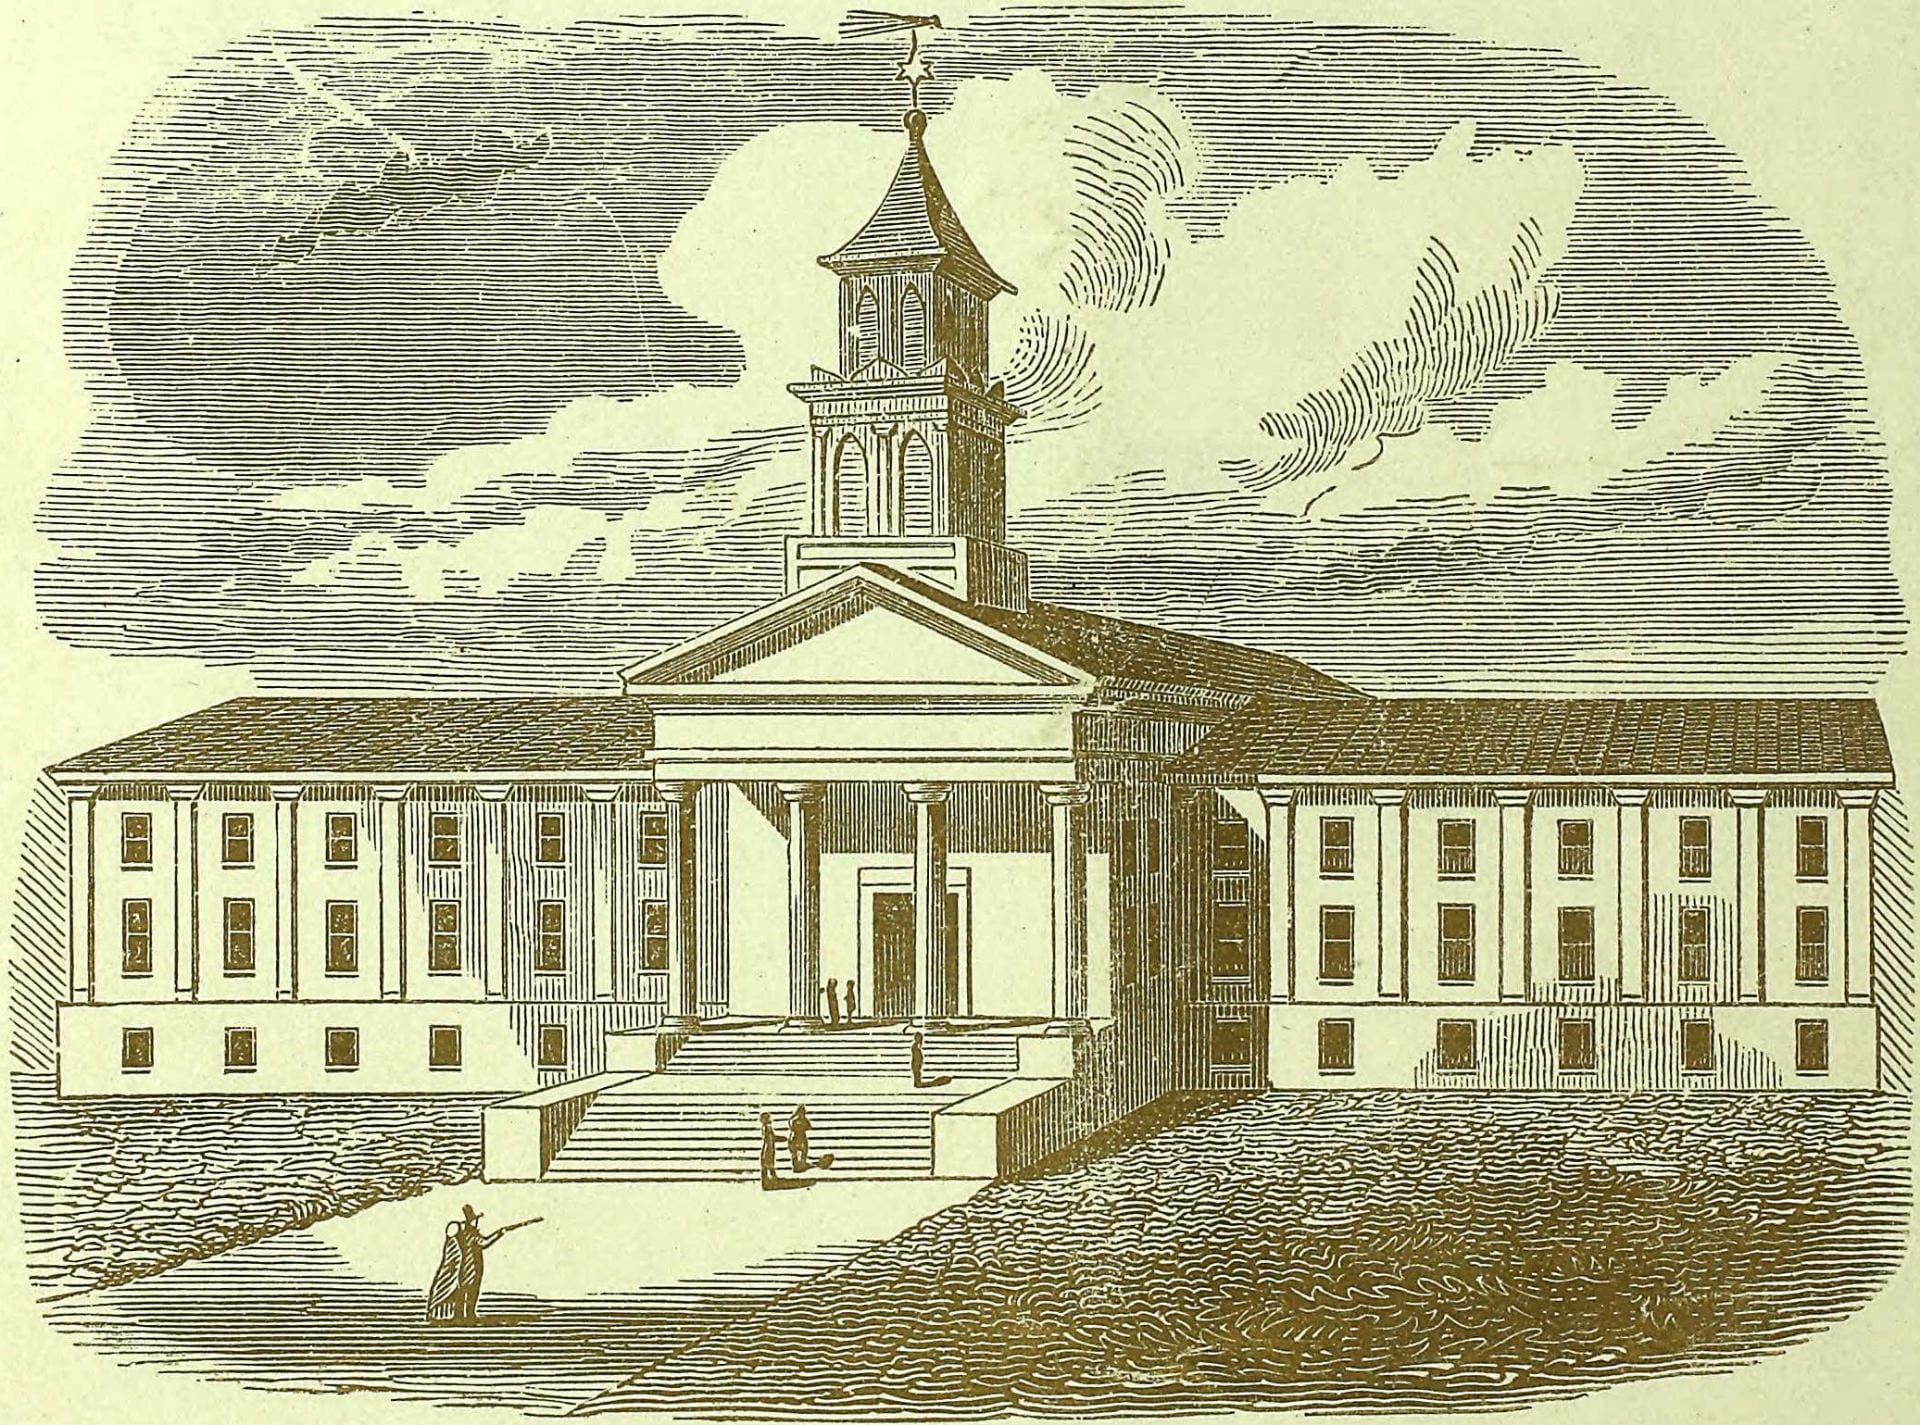 Delaware College, as pictured in the 1853 catalogue